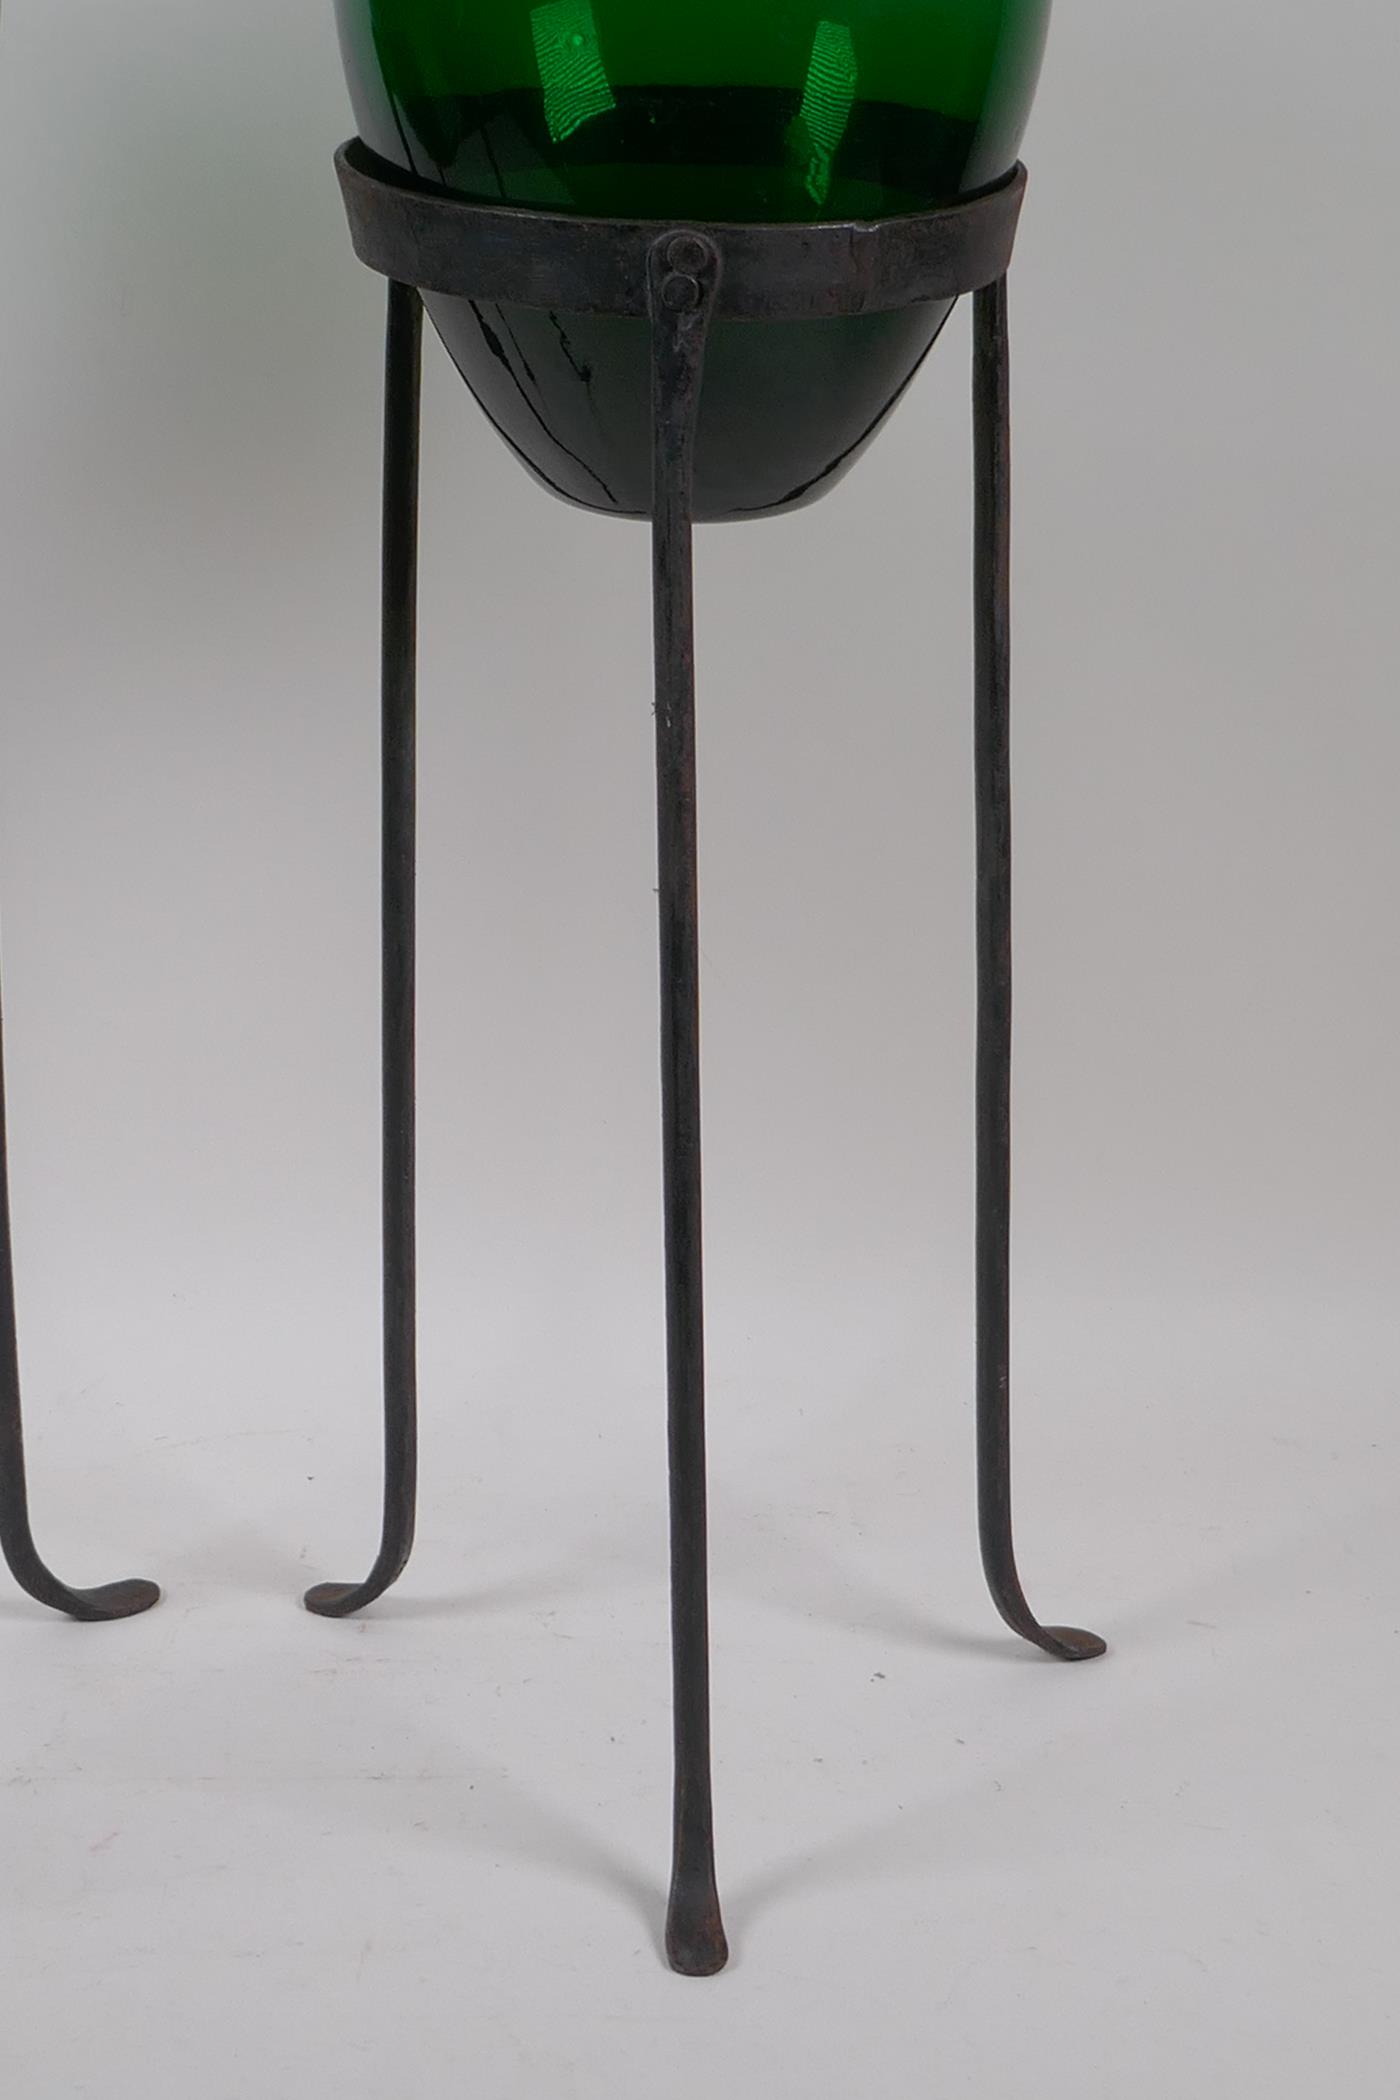 A pair of green glass vases on wrought iron stands, 56cm high - Image 3 of 4